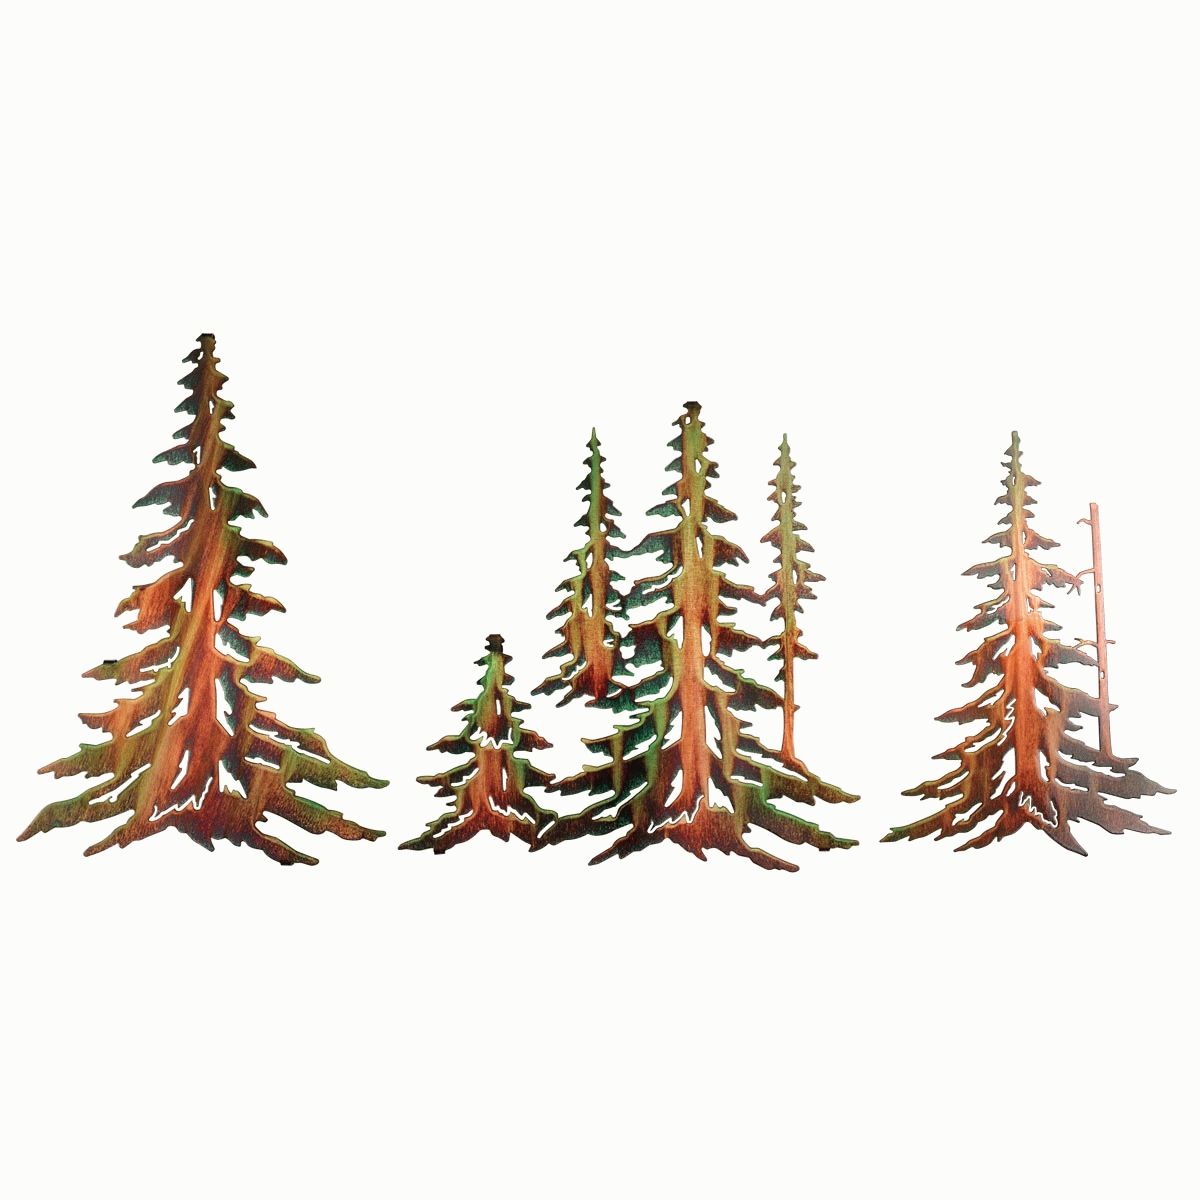 Neil Rose Metal Wall Art At Black Forest Decor Throughout Metal Pine Tree Wall Art (View 11 of 20)